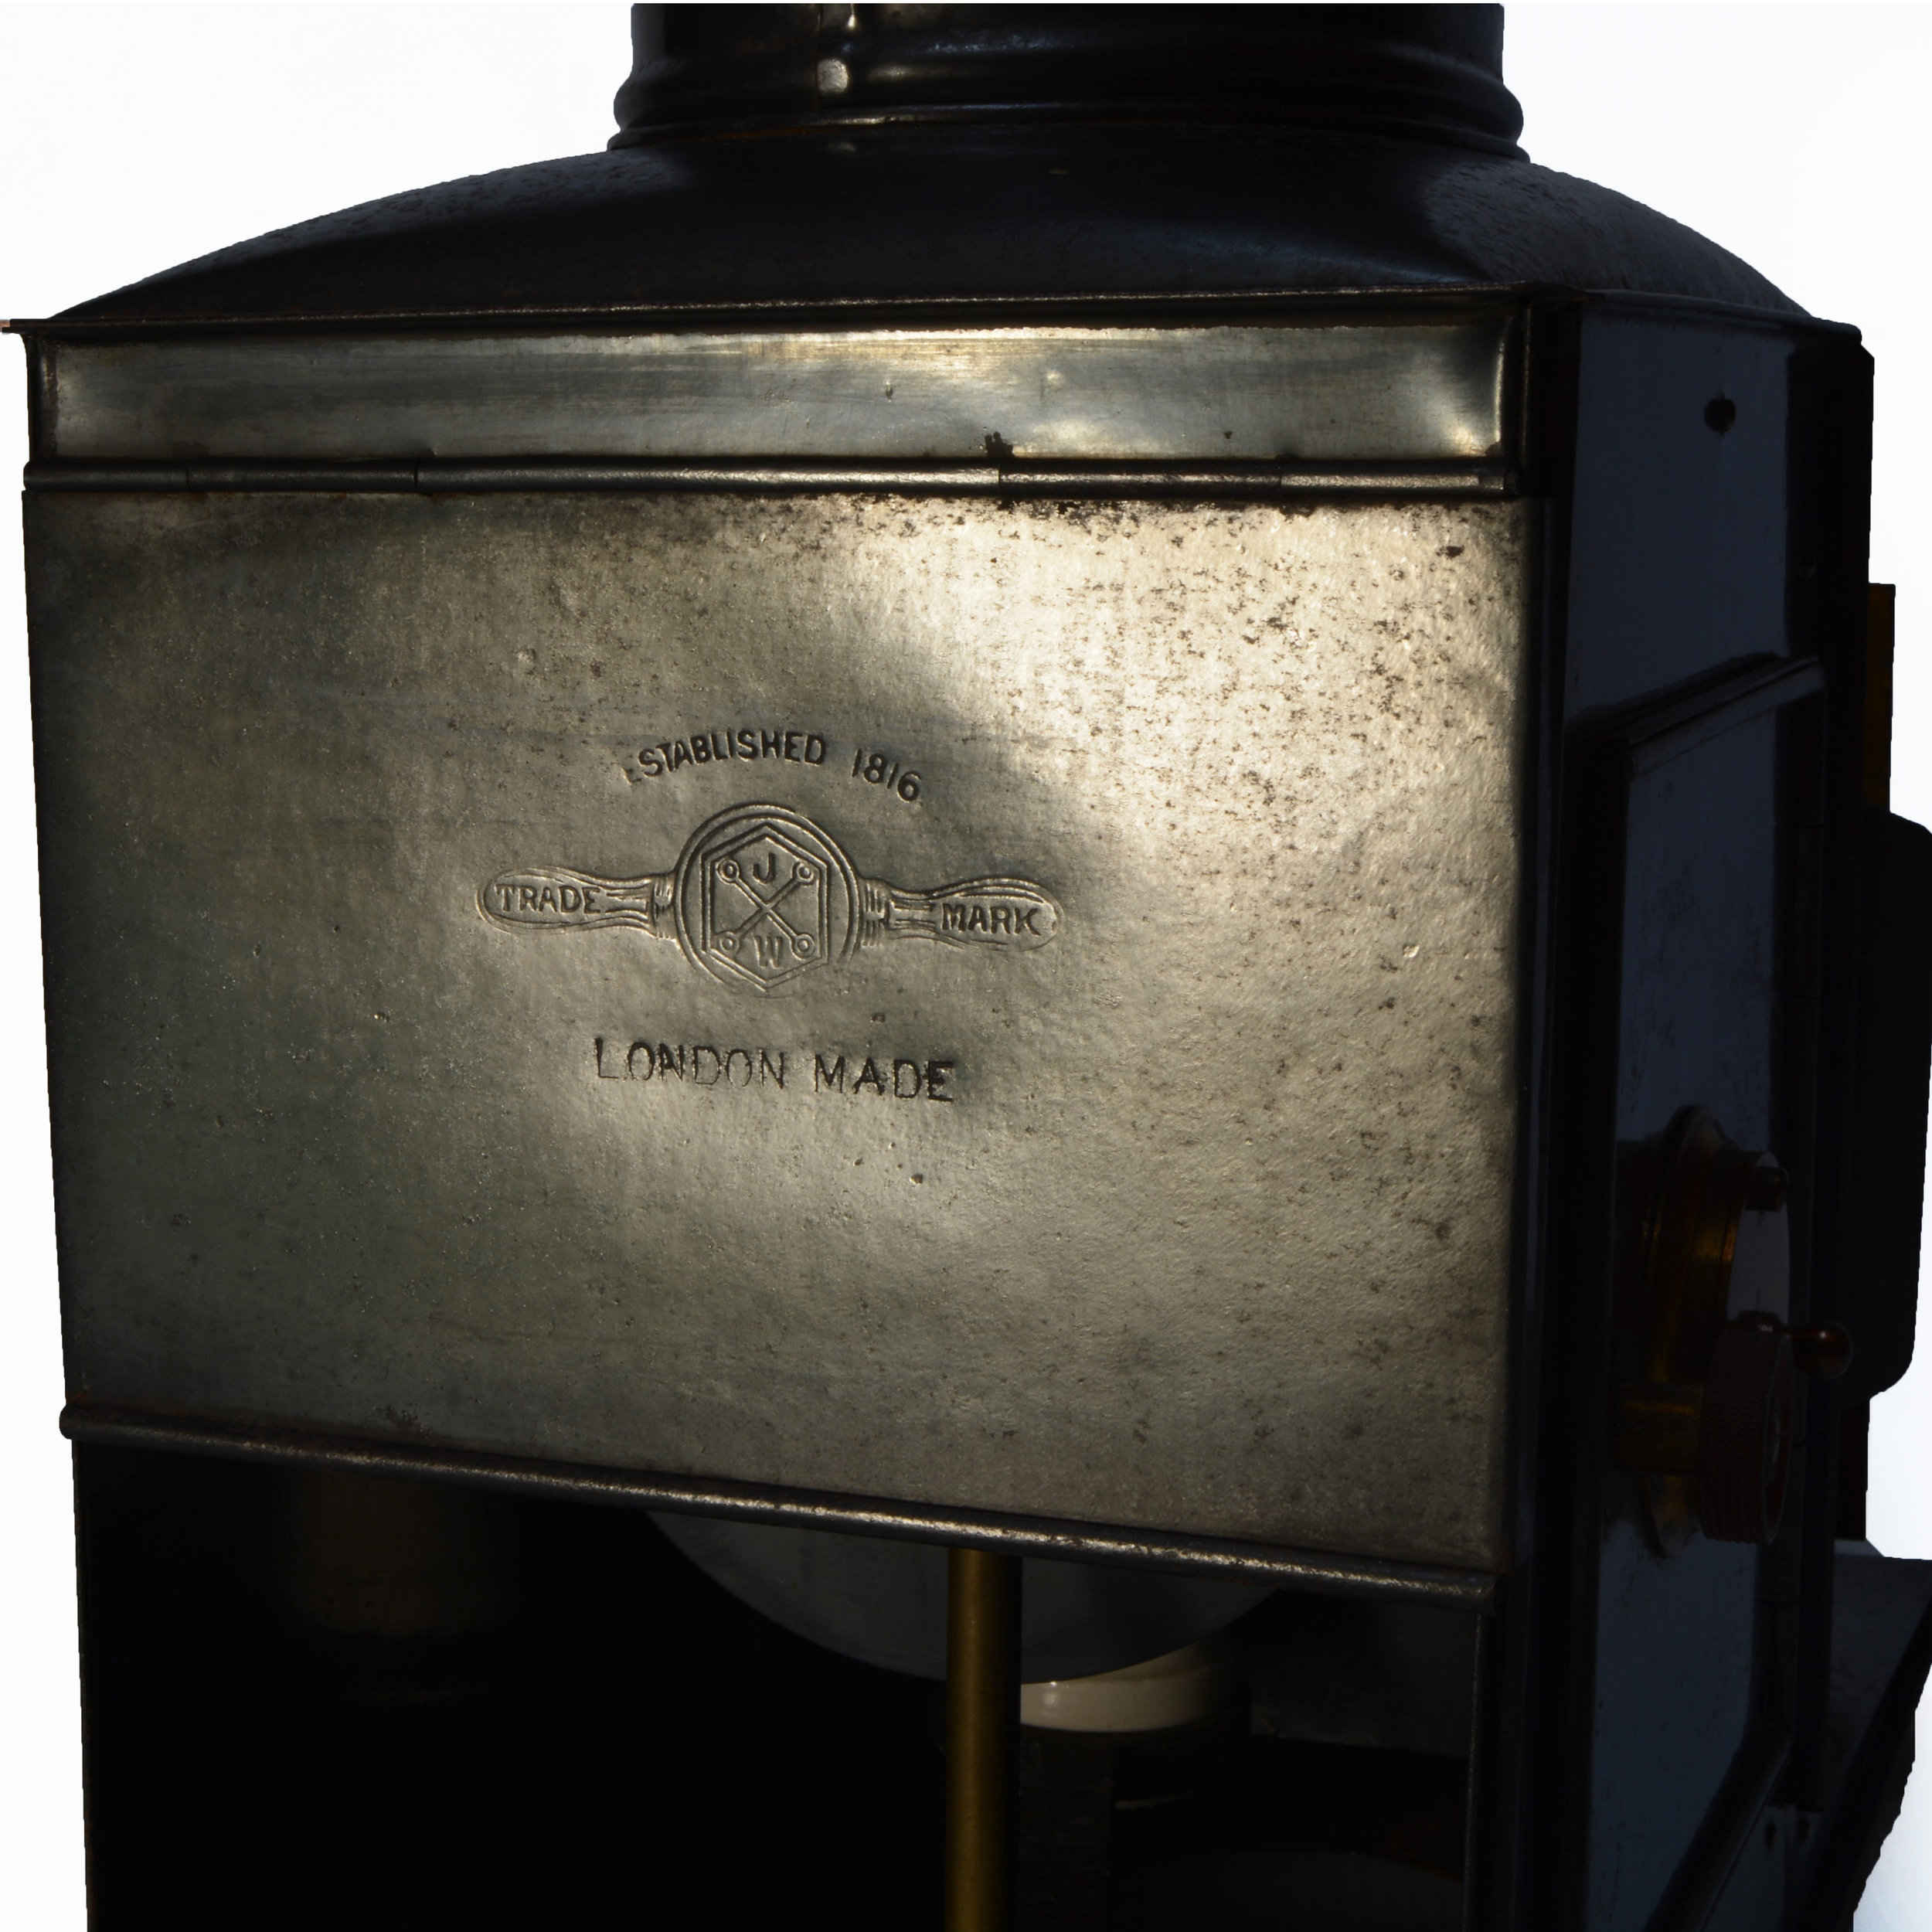 Antique magic lantern by John Wrench and Sons